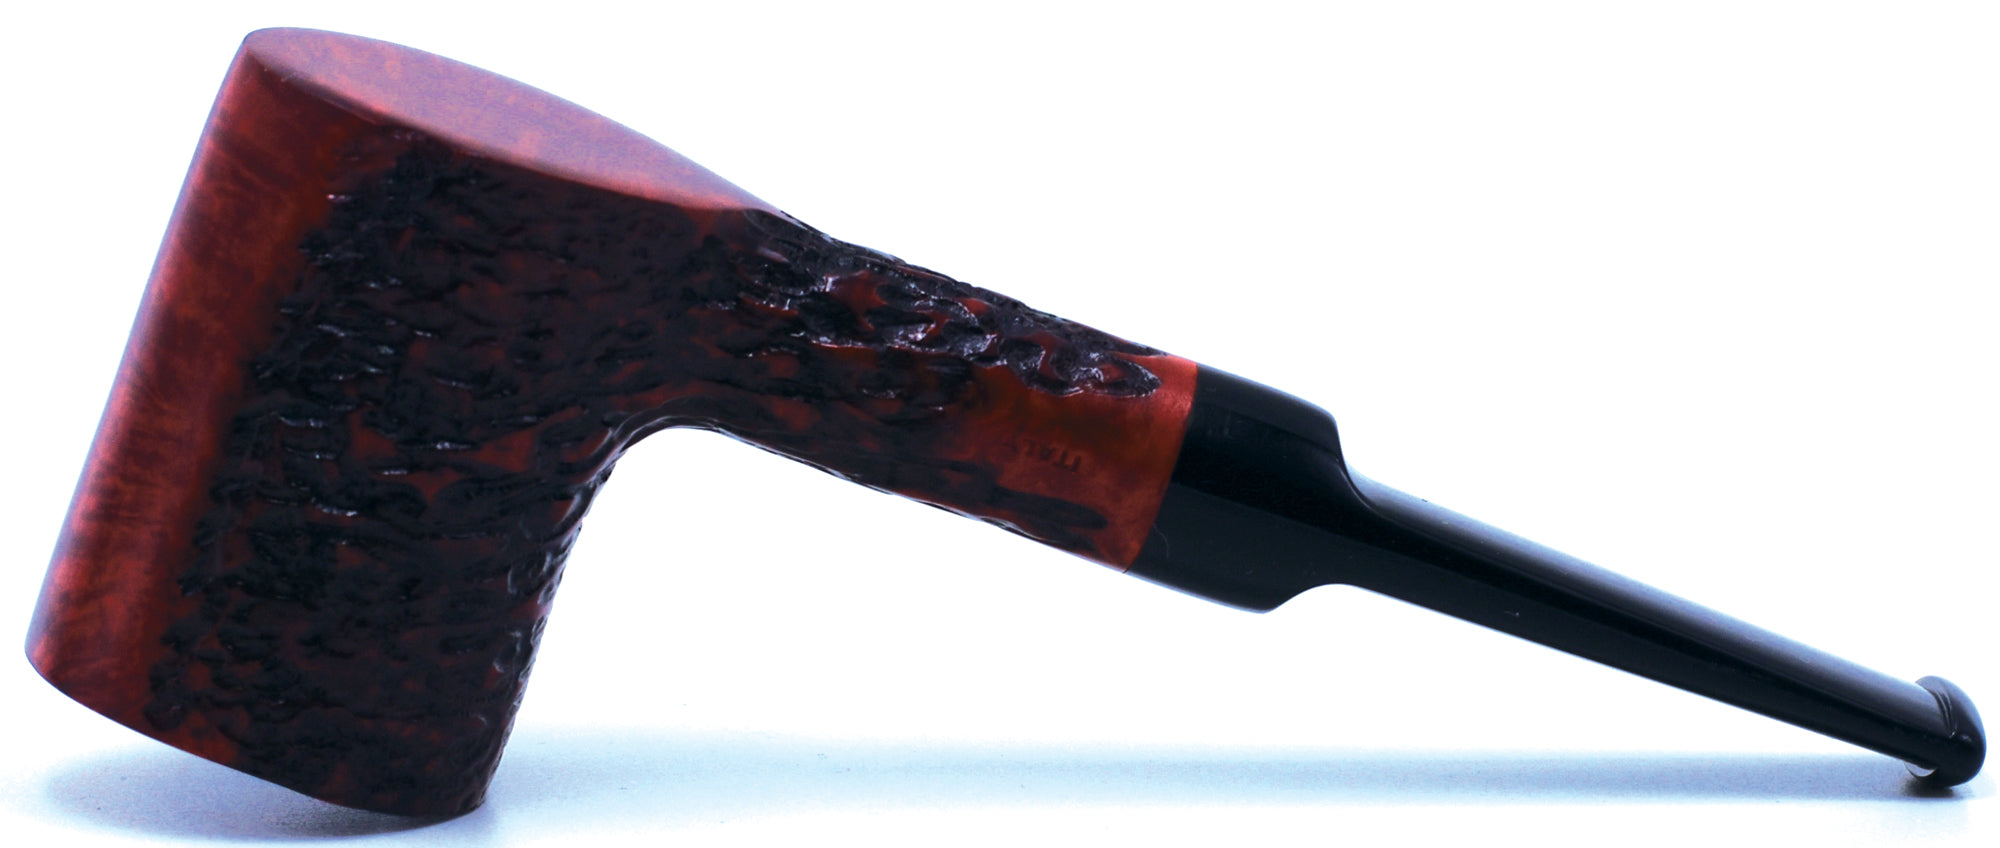 LEGENDEX® PAGANINI* 9 MM Filtered Briar Smoking Pipe Made In Italy 01-08-340